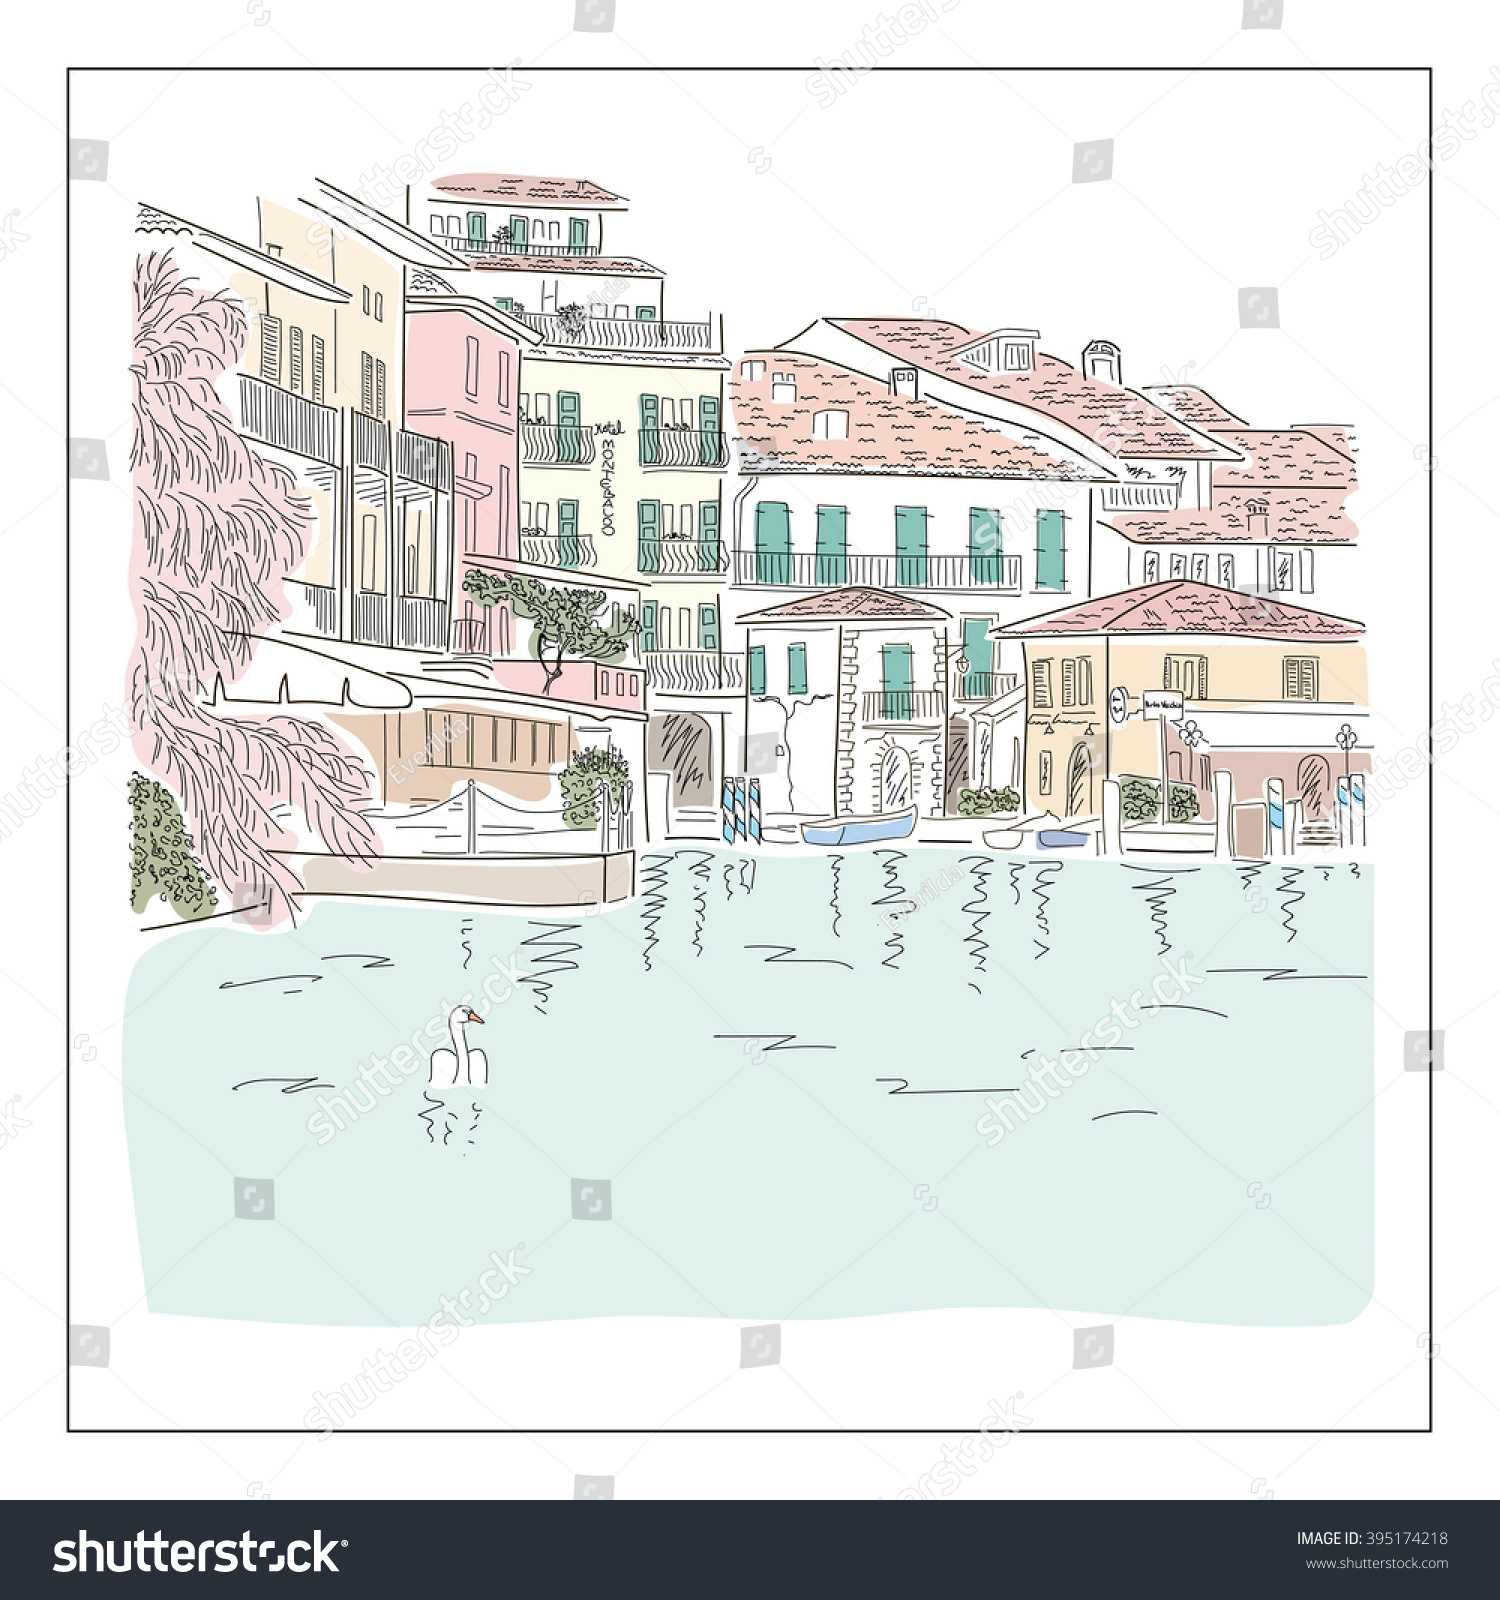 SVG of Old european town on the lake. Sketch and colorful background. Vector illustration. svg